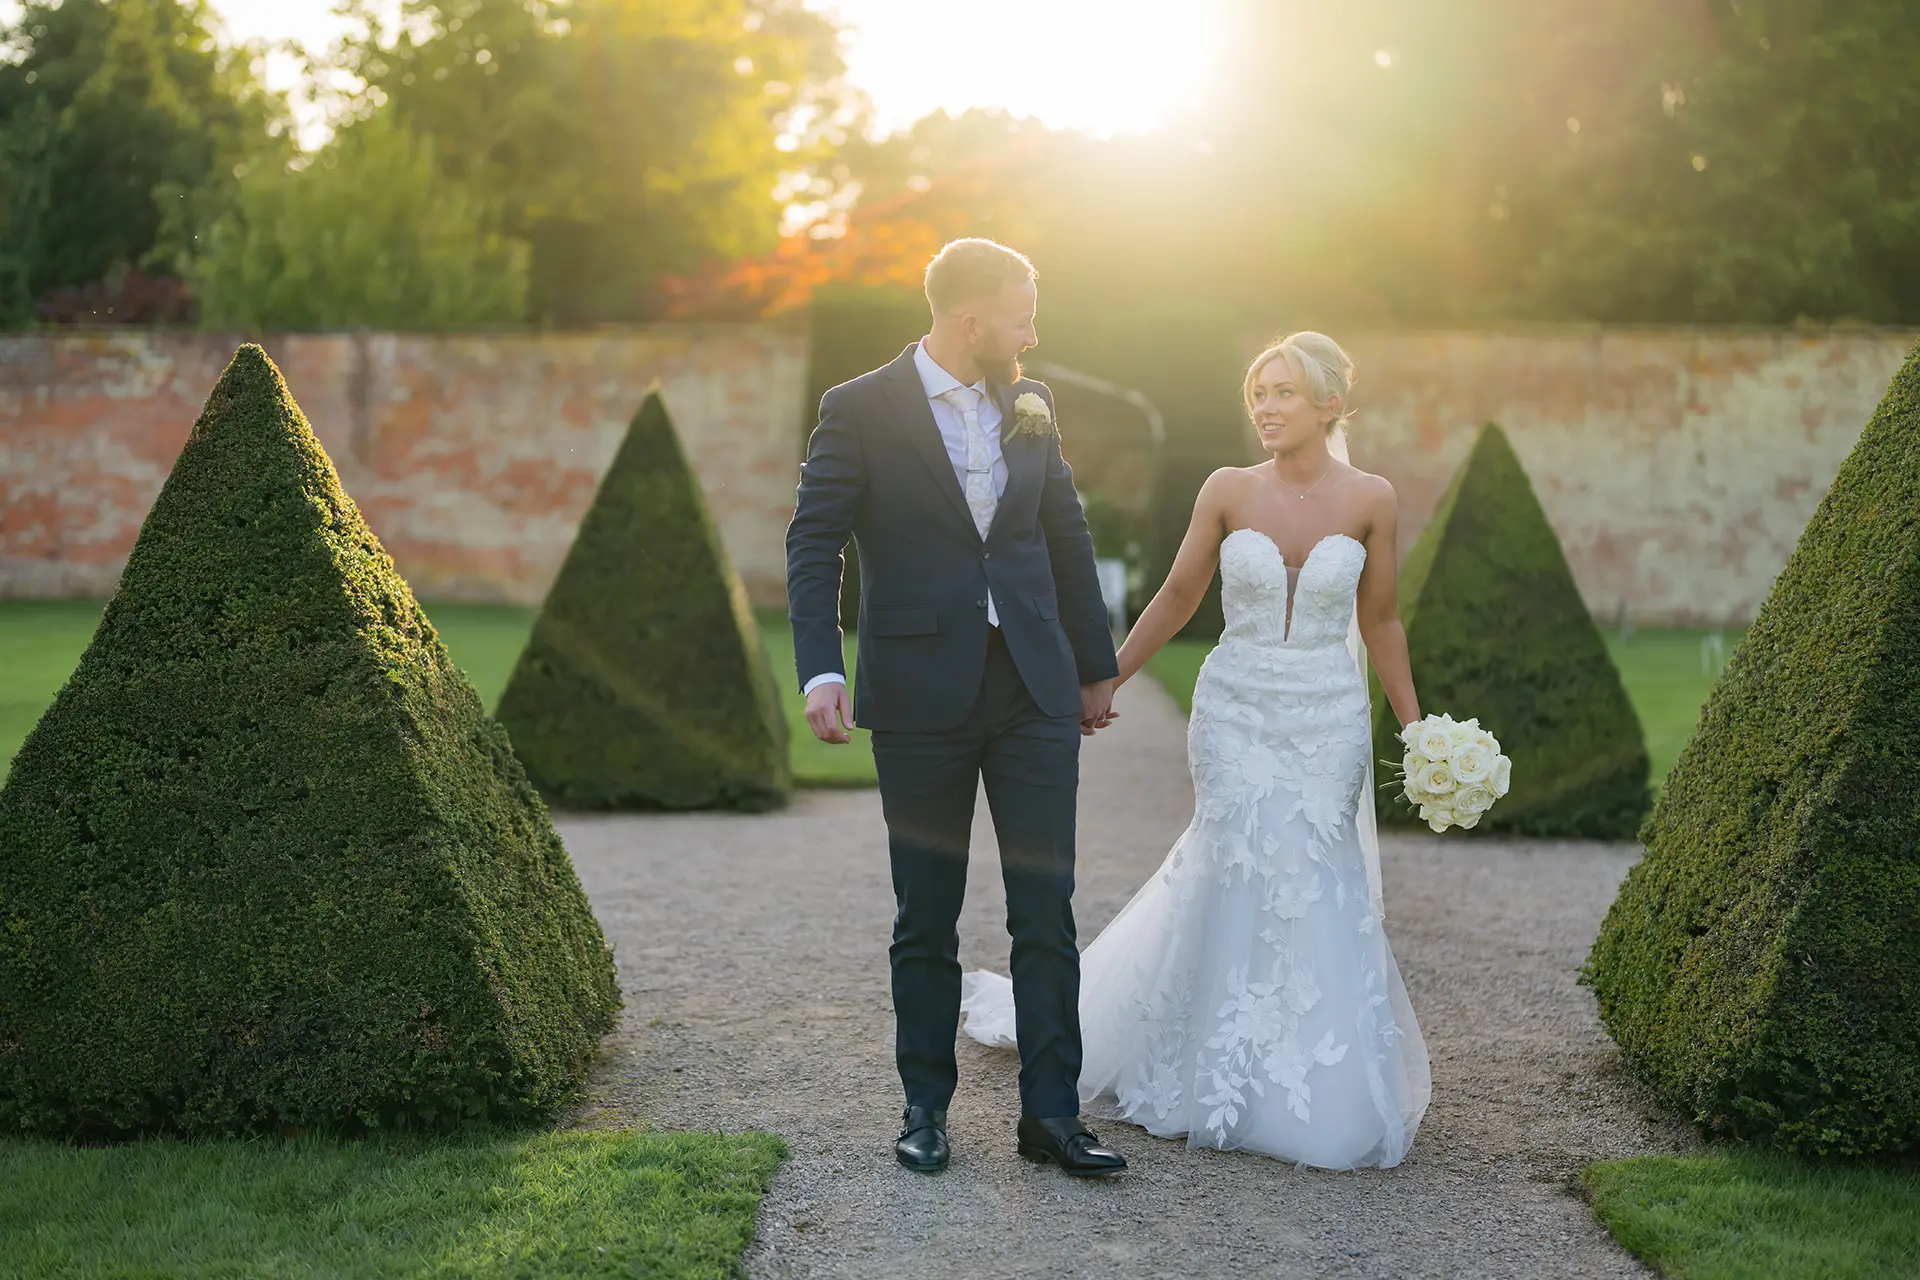 Combermere Abbey couple in gardens at sunset